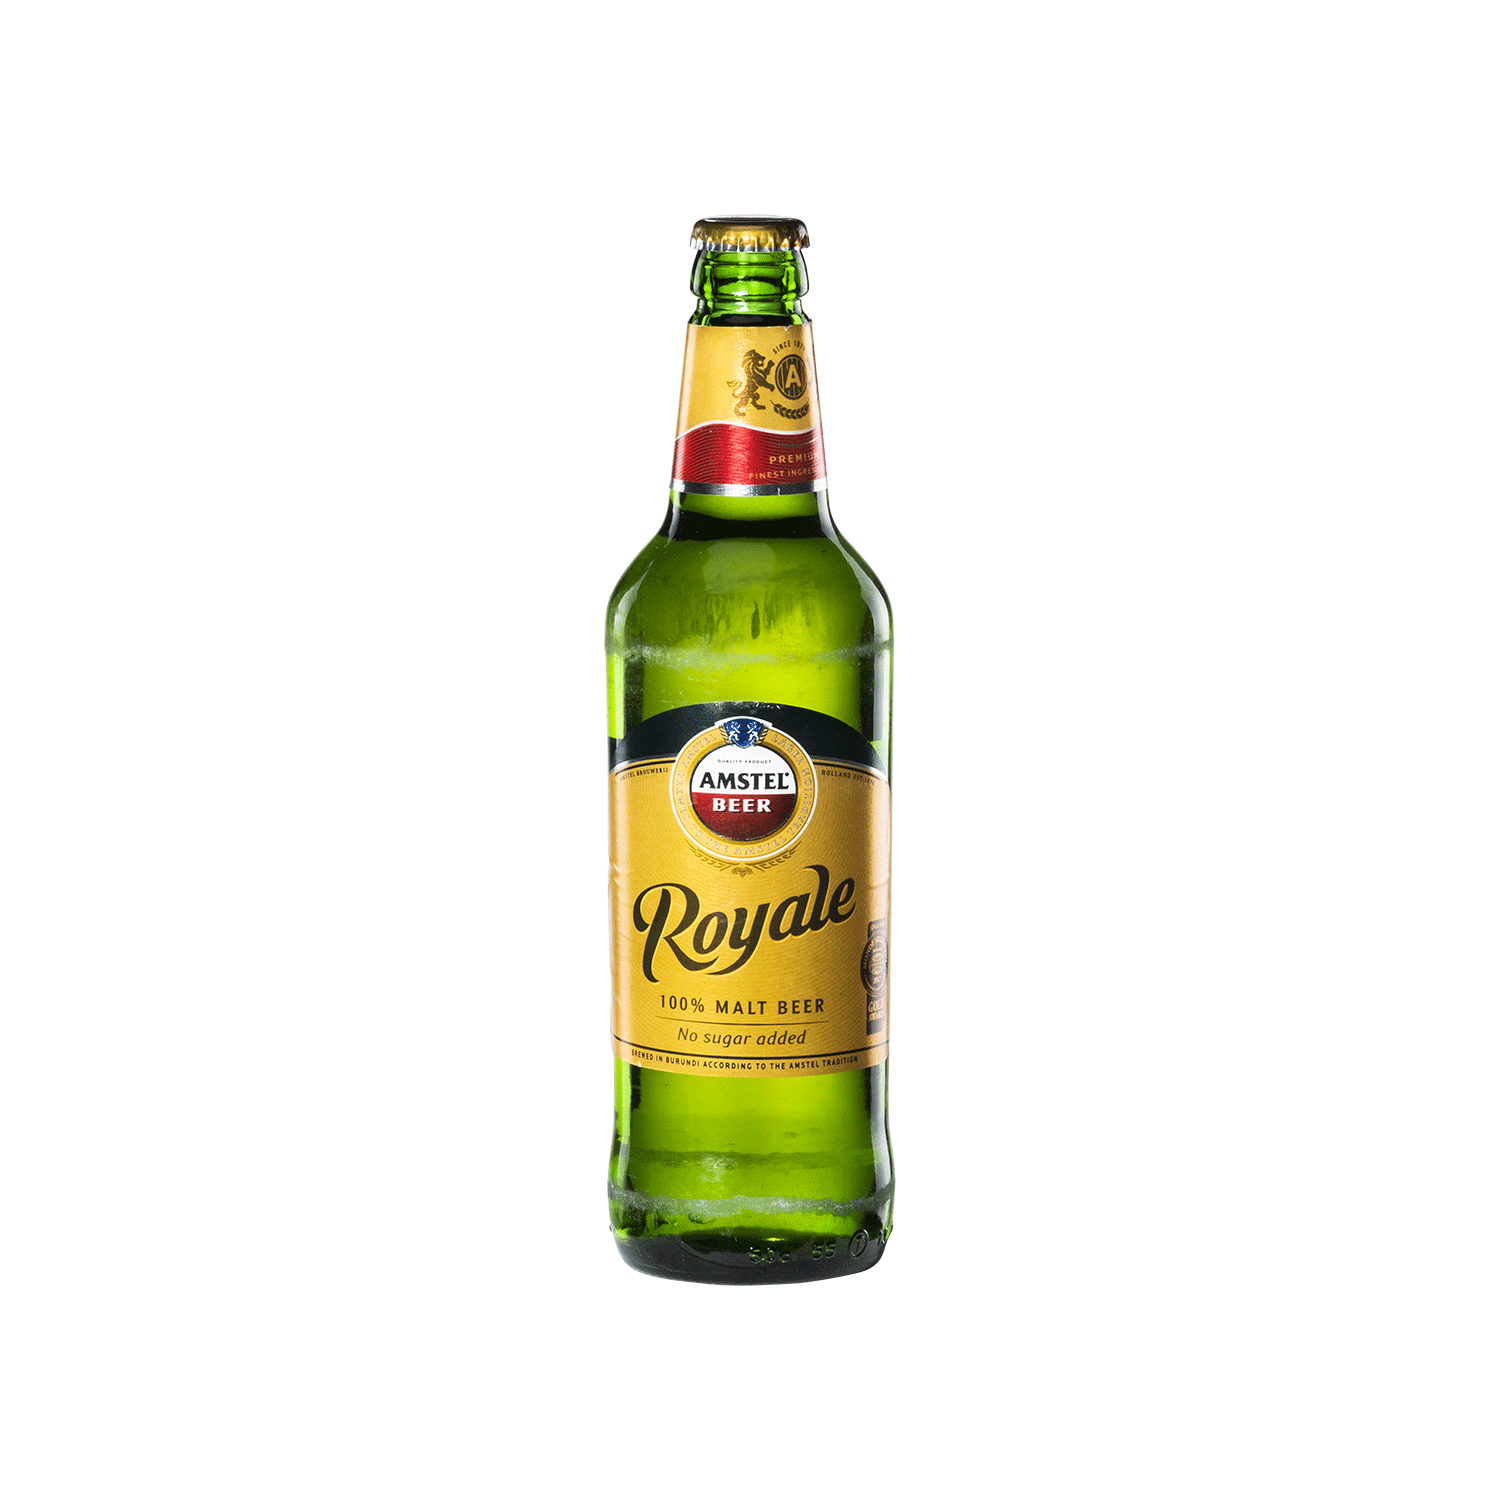 Amstel Royale - Silver Quality Award 2021 from Monde Selection